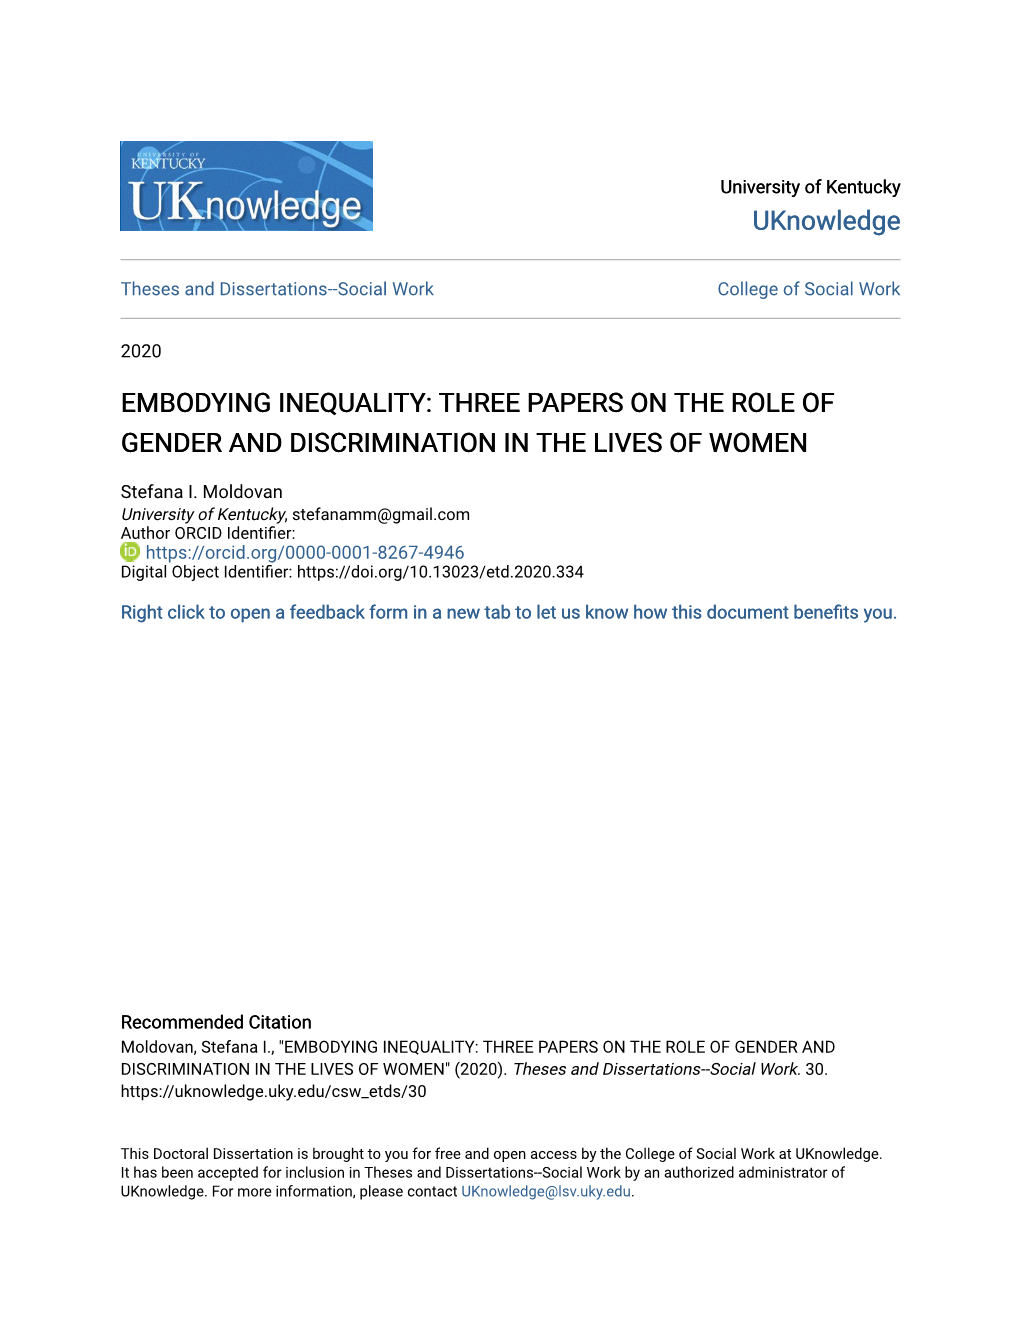 Embodying Inequality: Three Papers on the Role of Gender and Discrimination in the Lives of Women